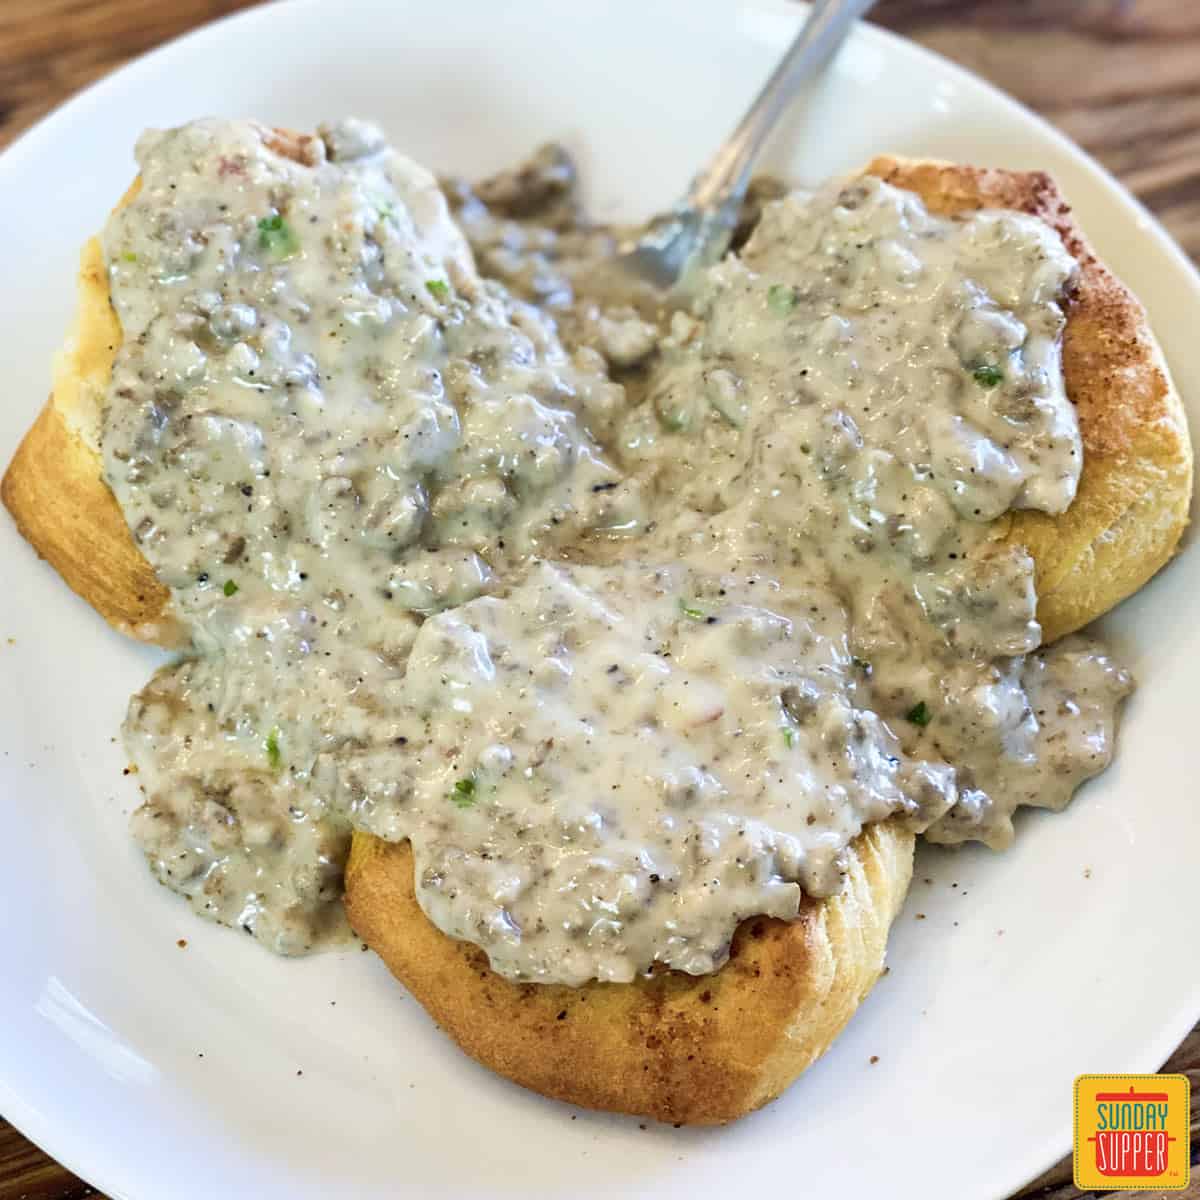 Three biscuits with sausage gravy on top on a white plate